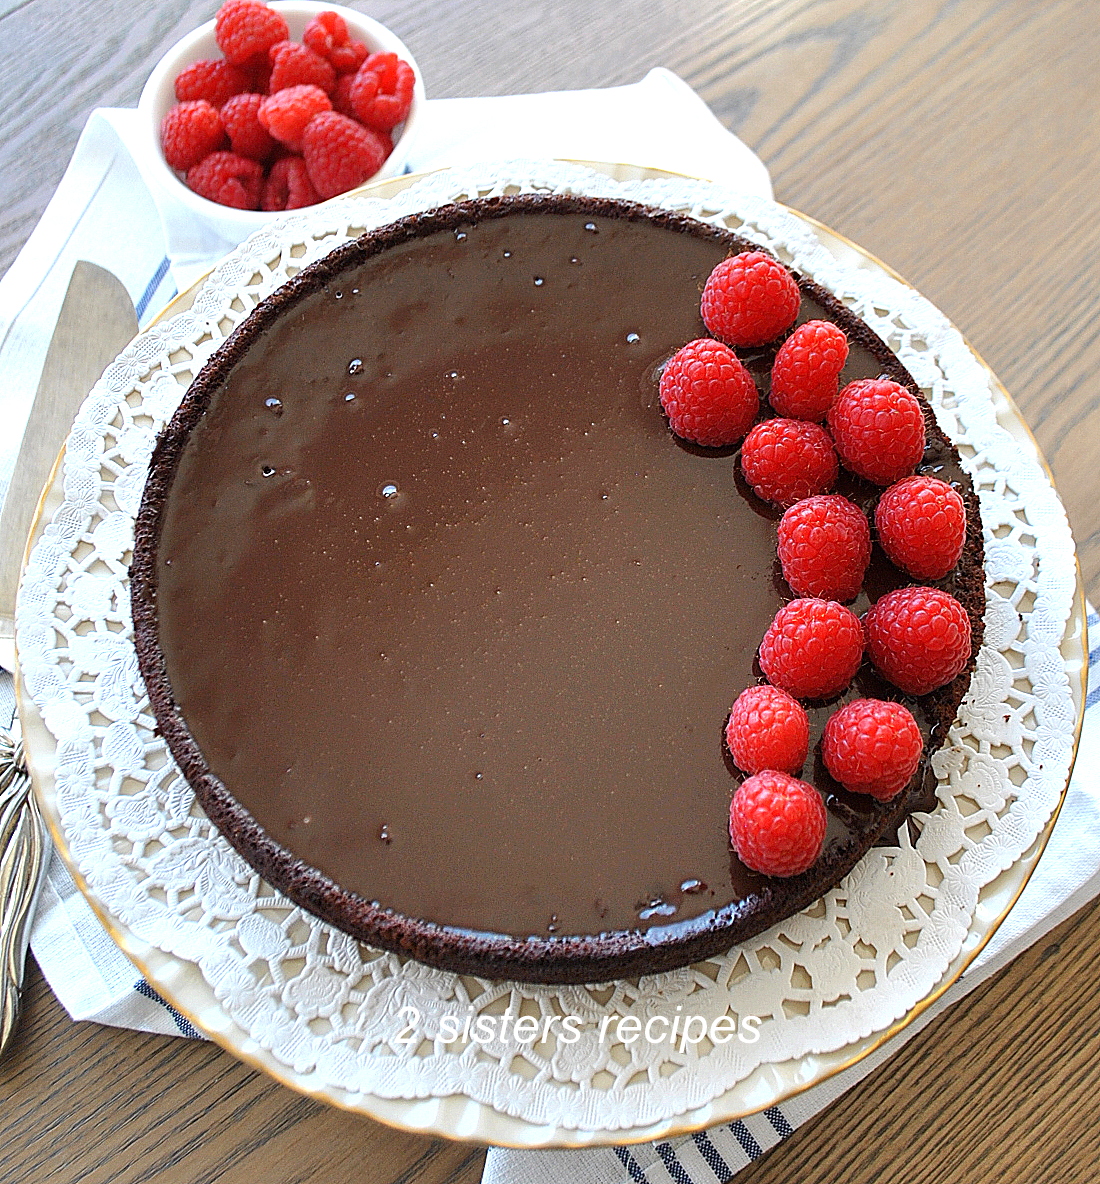 Easiest Flourless Chocolate Cake - 2 Sisters Recipes by Anna and Liz